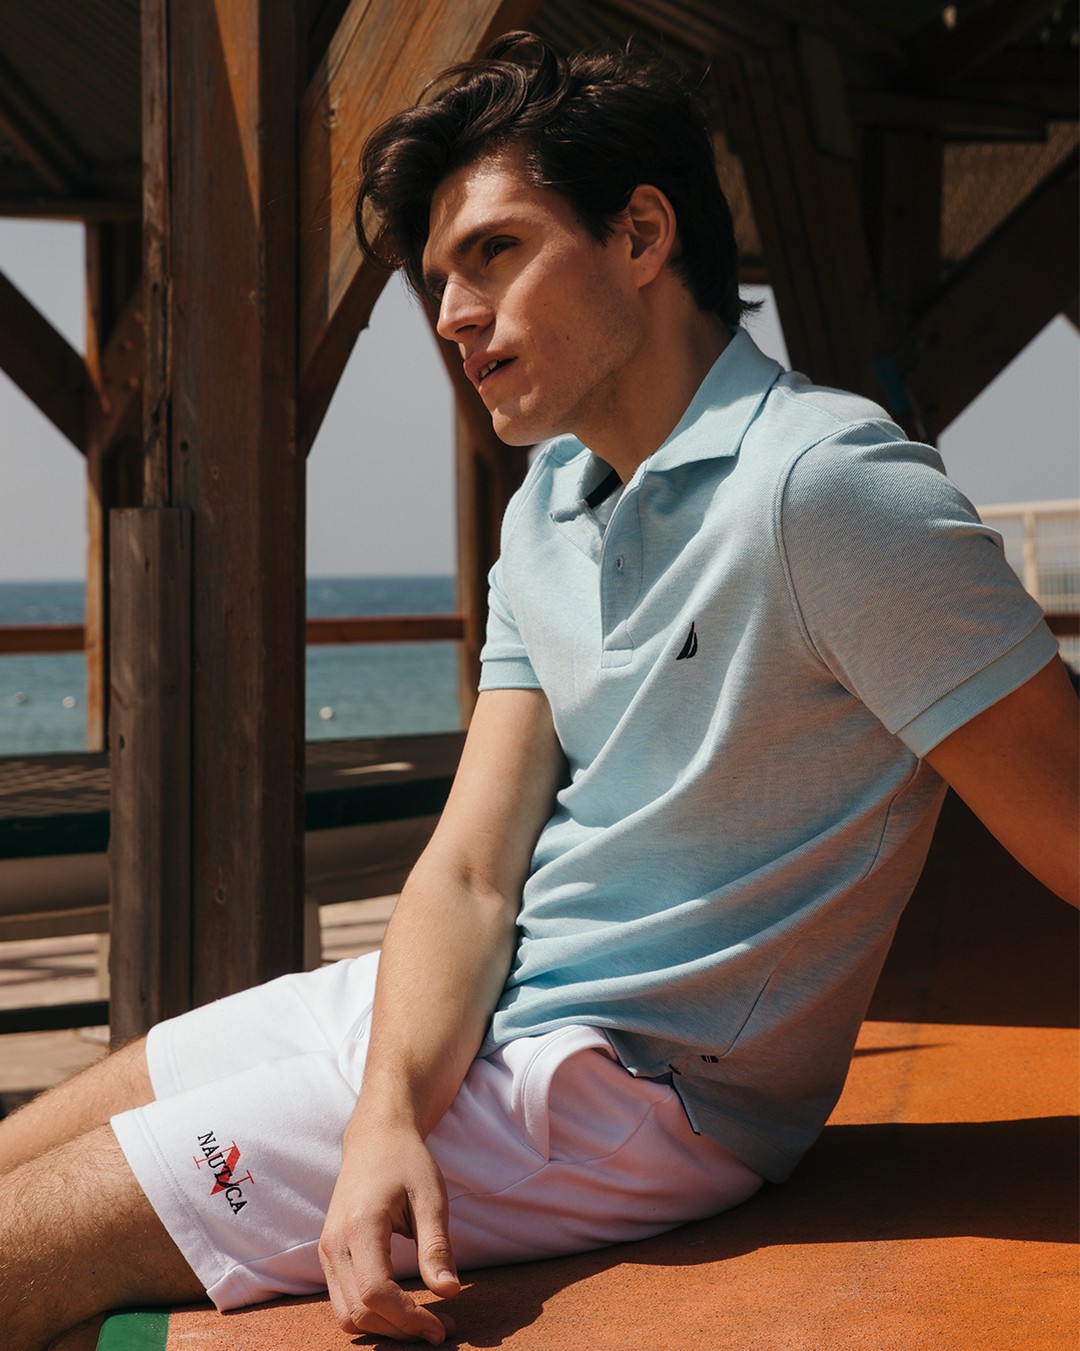 Refresh your closet with new polos made from soft, sustainably, crafted fabrics

#nautica #summercollection